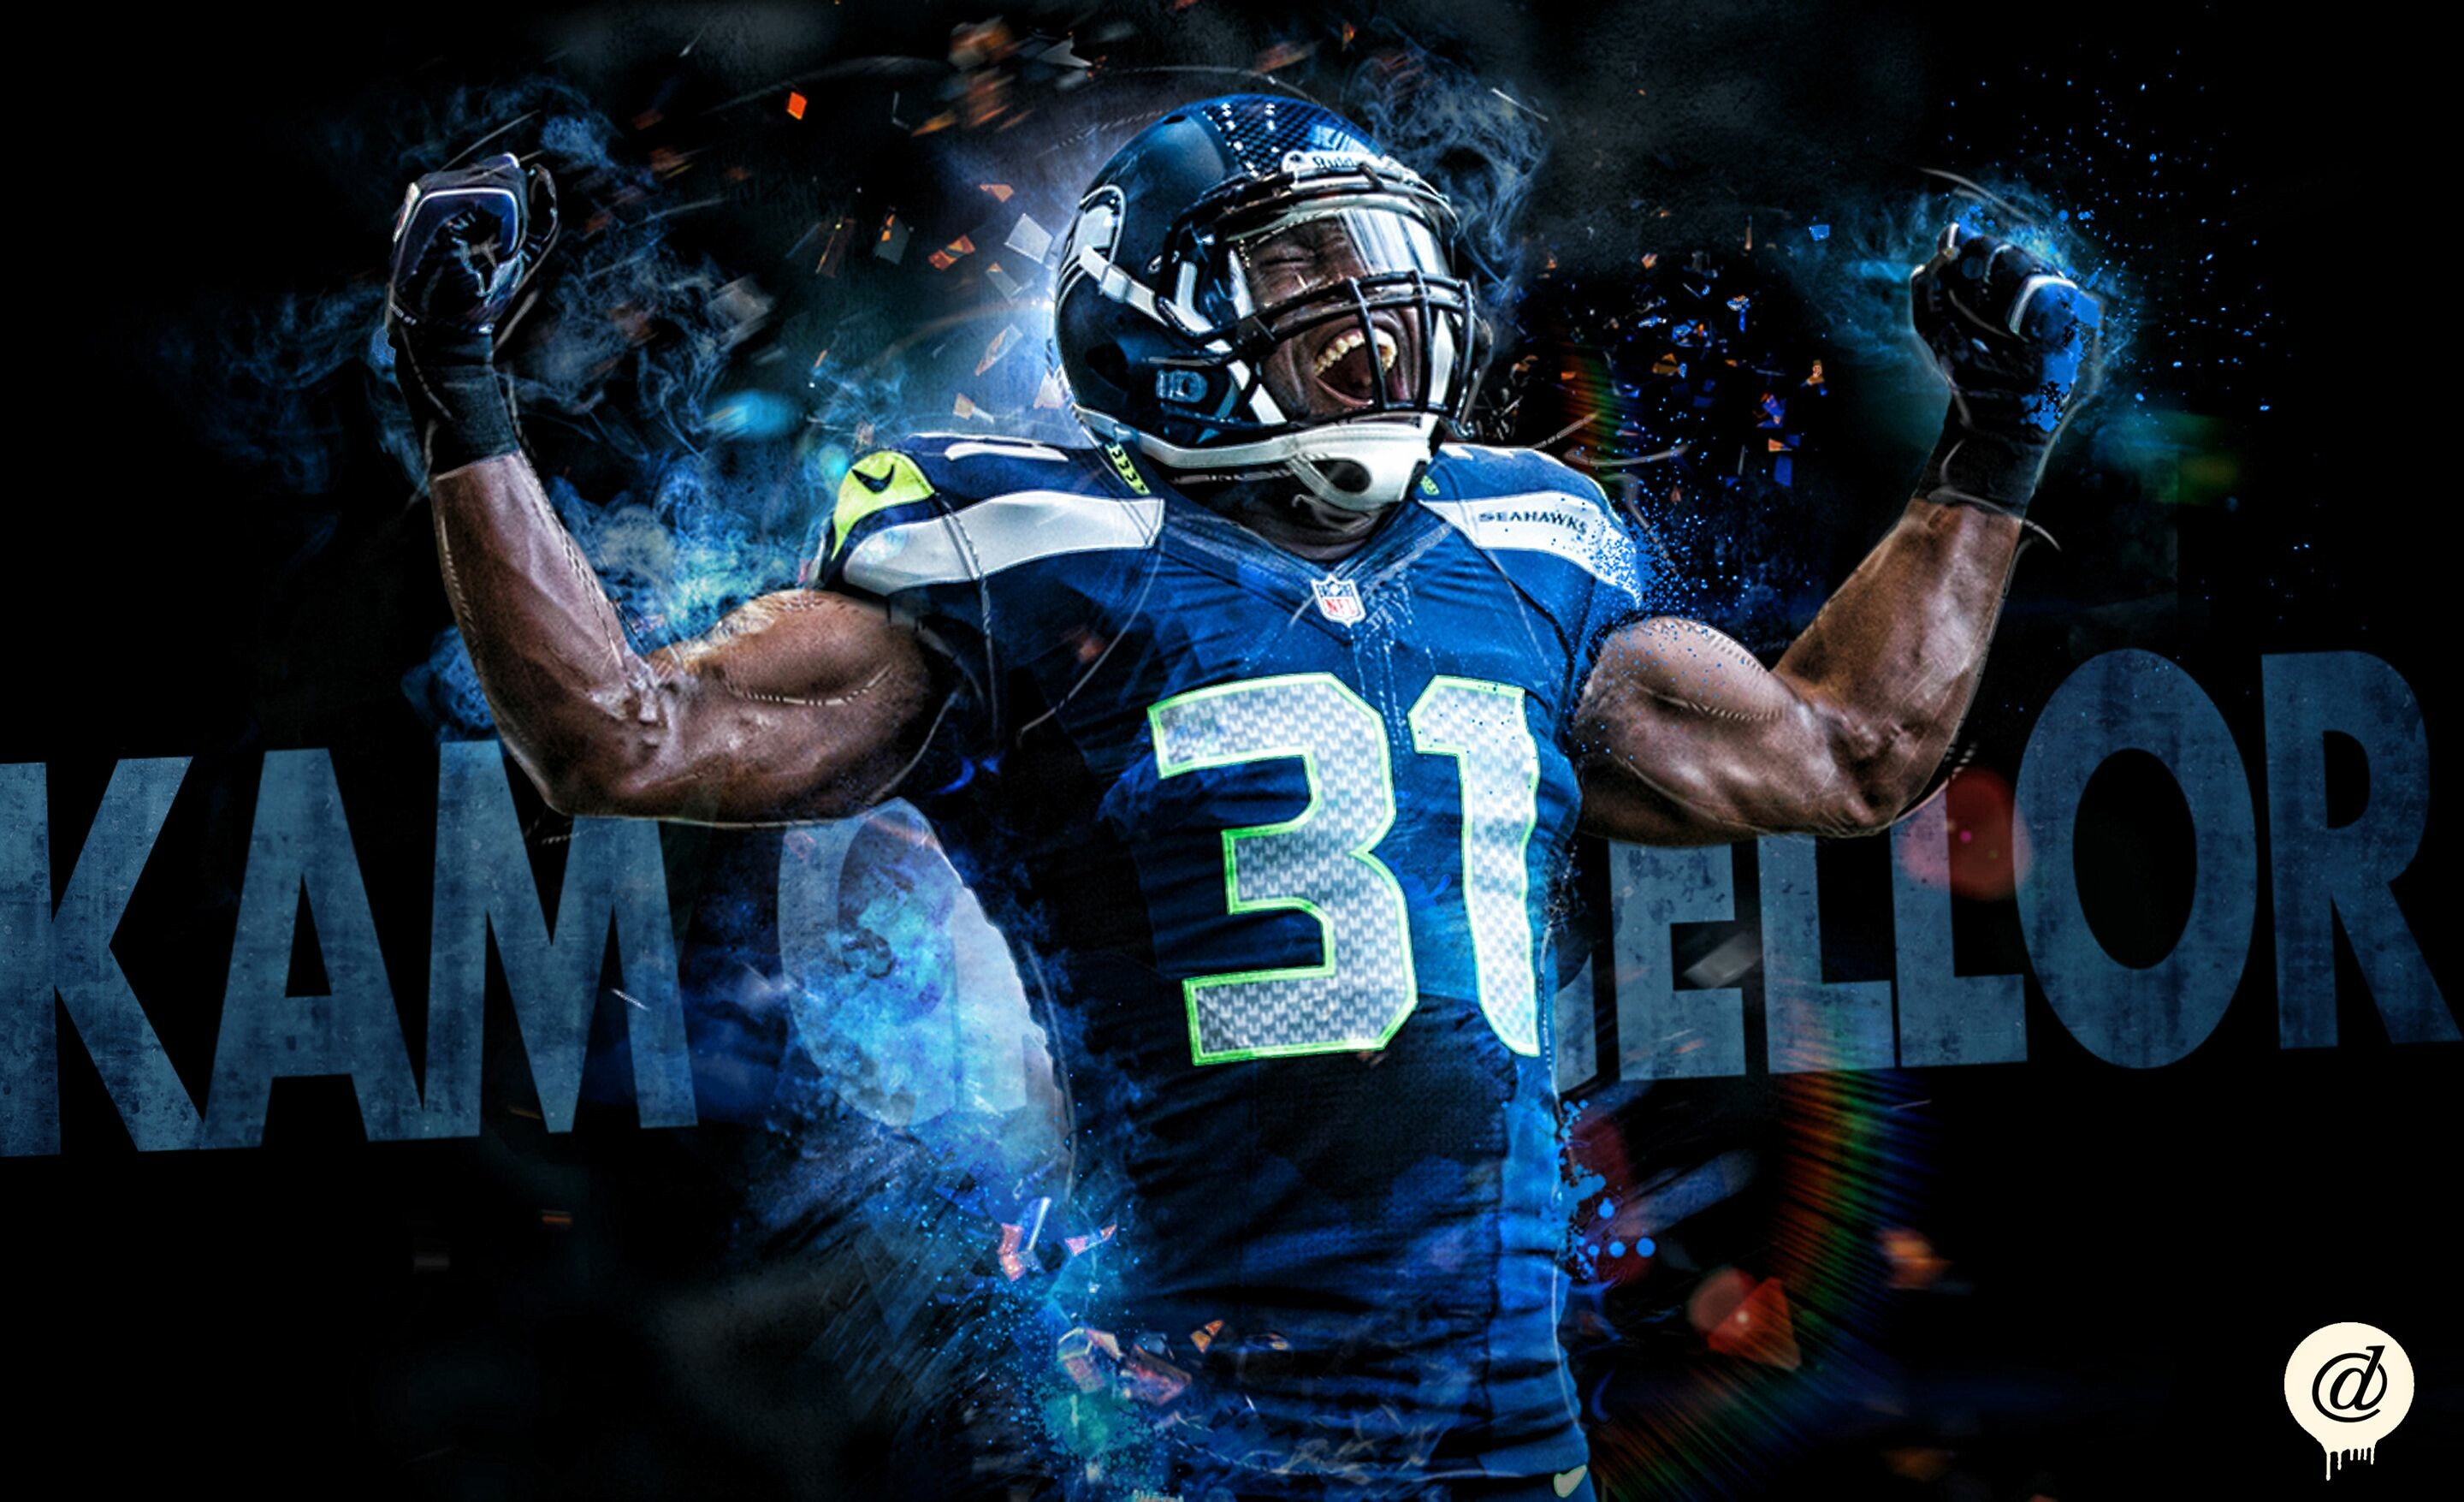 NFL 12K Wallpaper: HD, 4K, 5K for PC and Mobile. Download free image for iPhone, Android